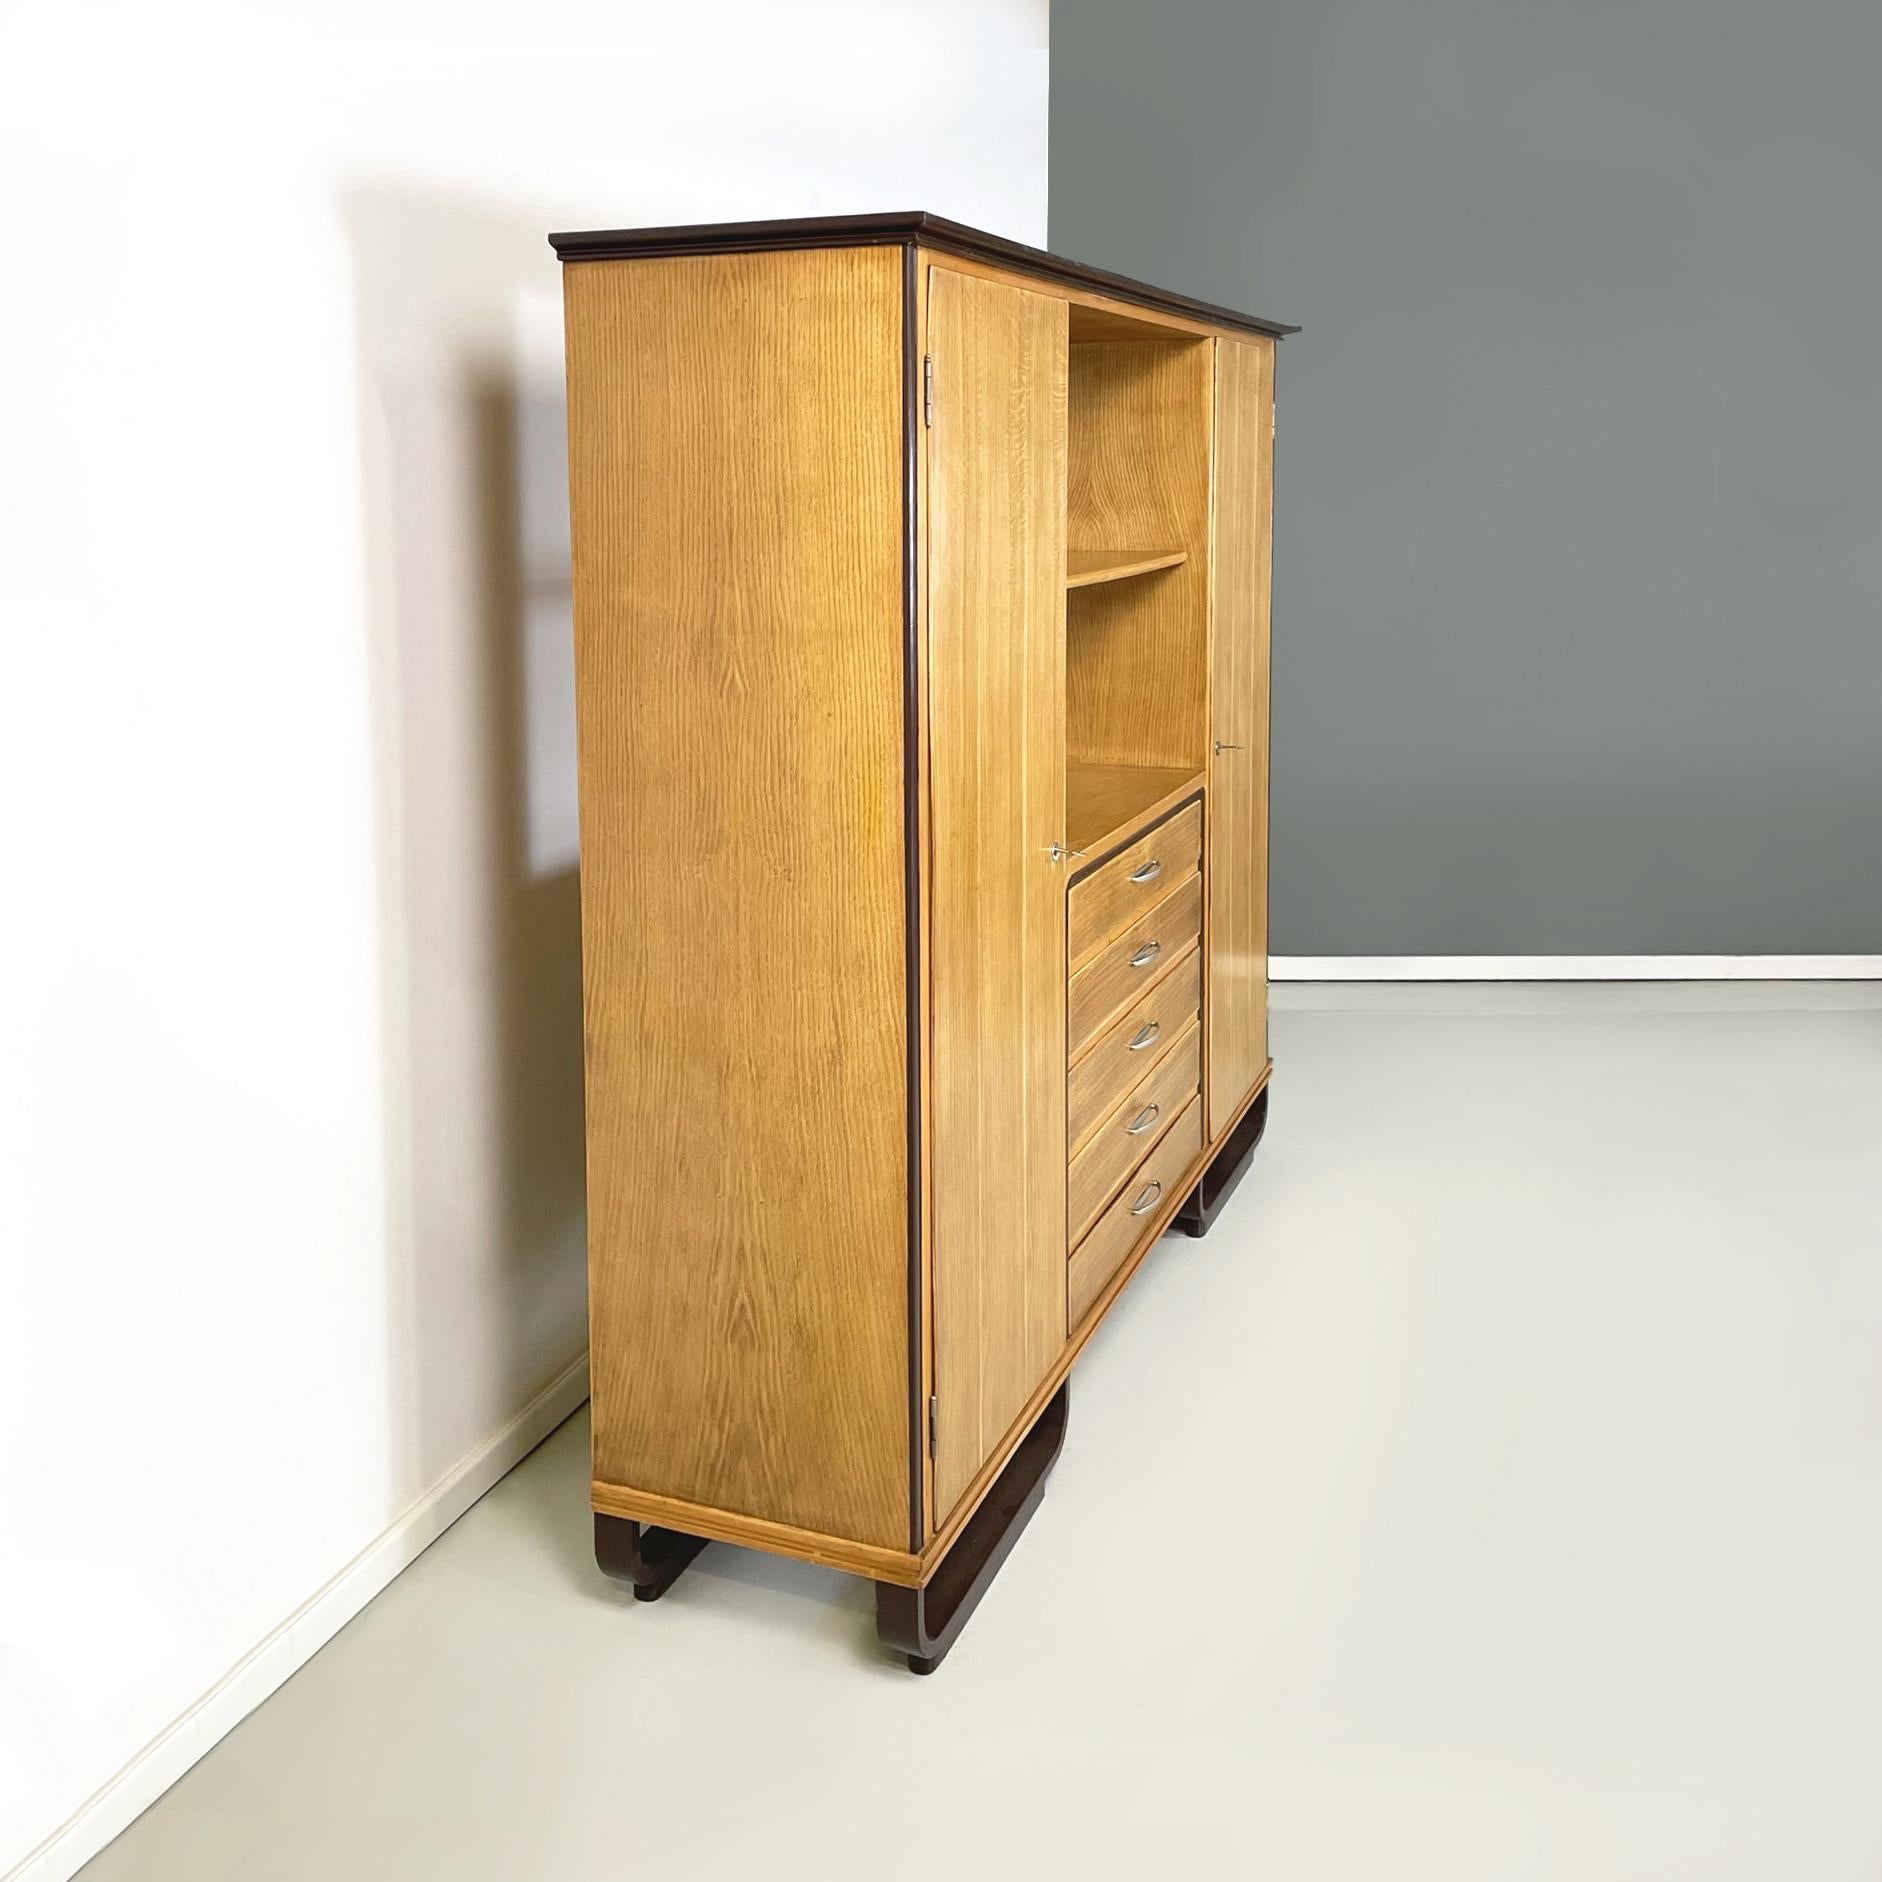 Italian art deco Wood cabinet wardrobe by Giuseppe Pagano Pogatschnig, 1930s In Good Condition For Sale In MIlano, IT